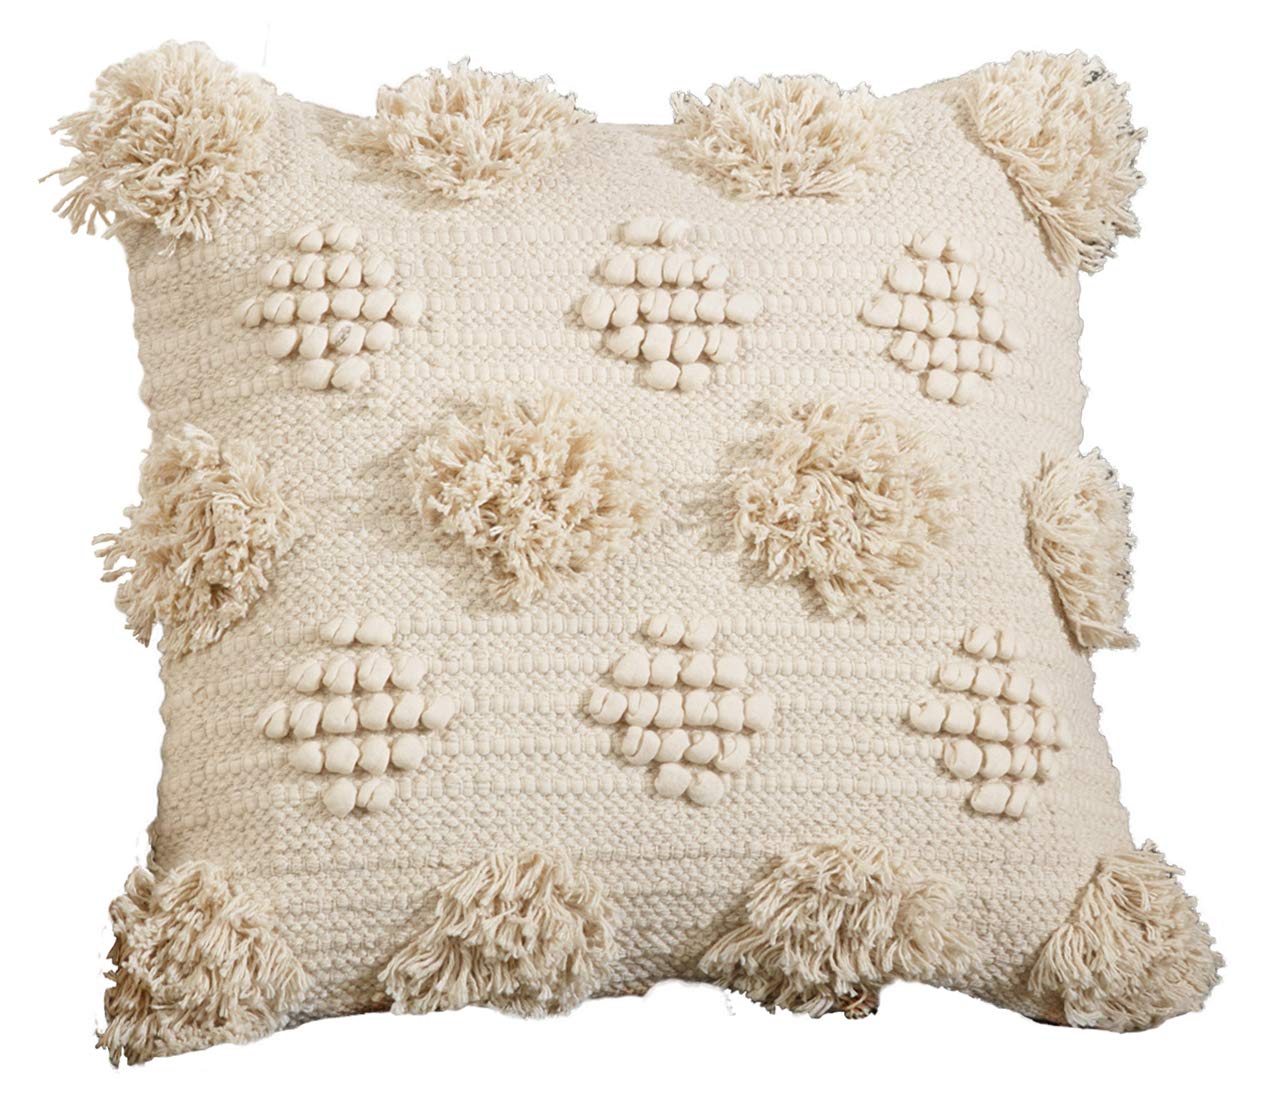 Fennco Styles Handira Collection Contemporary Morocca 100% Pure Cotton 18 x 18 Inch Decorative Throw Pillows with Case & Insert - Ivory Decor Pillows for Couch, Bedroom and Living Room Décor